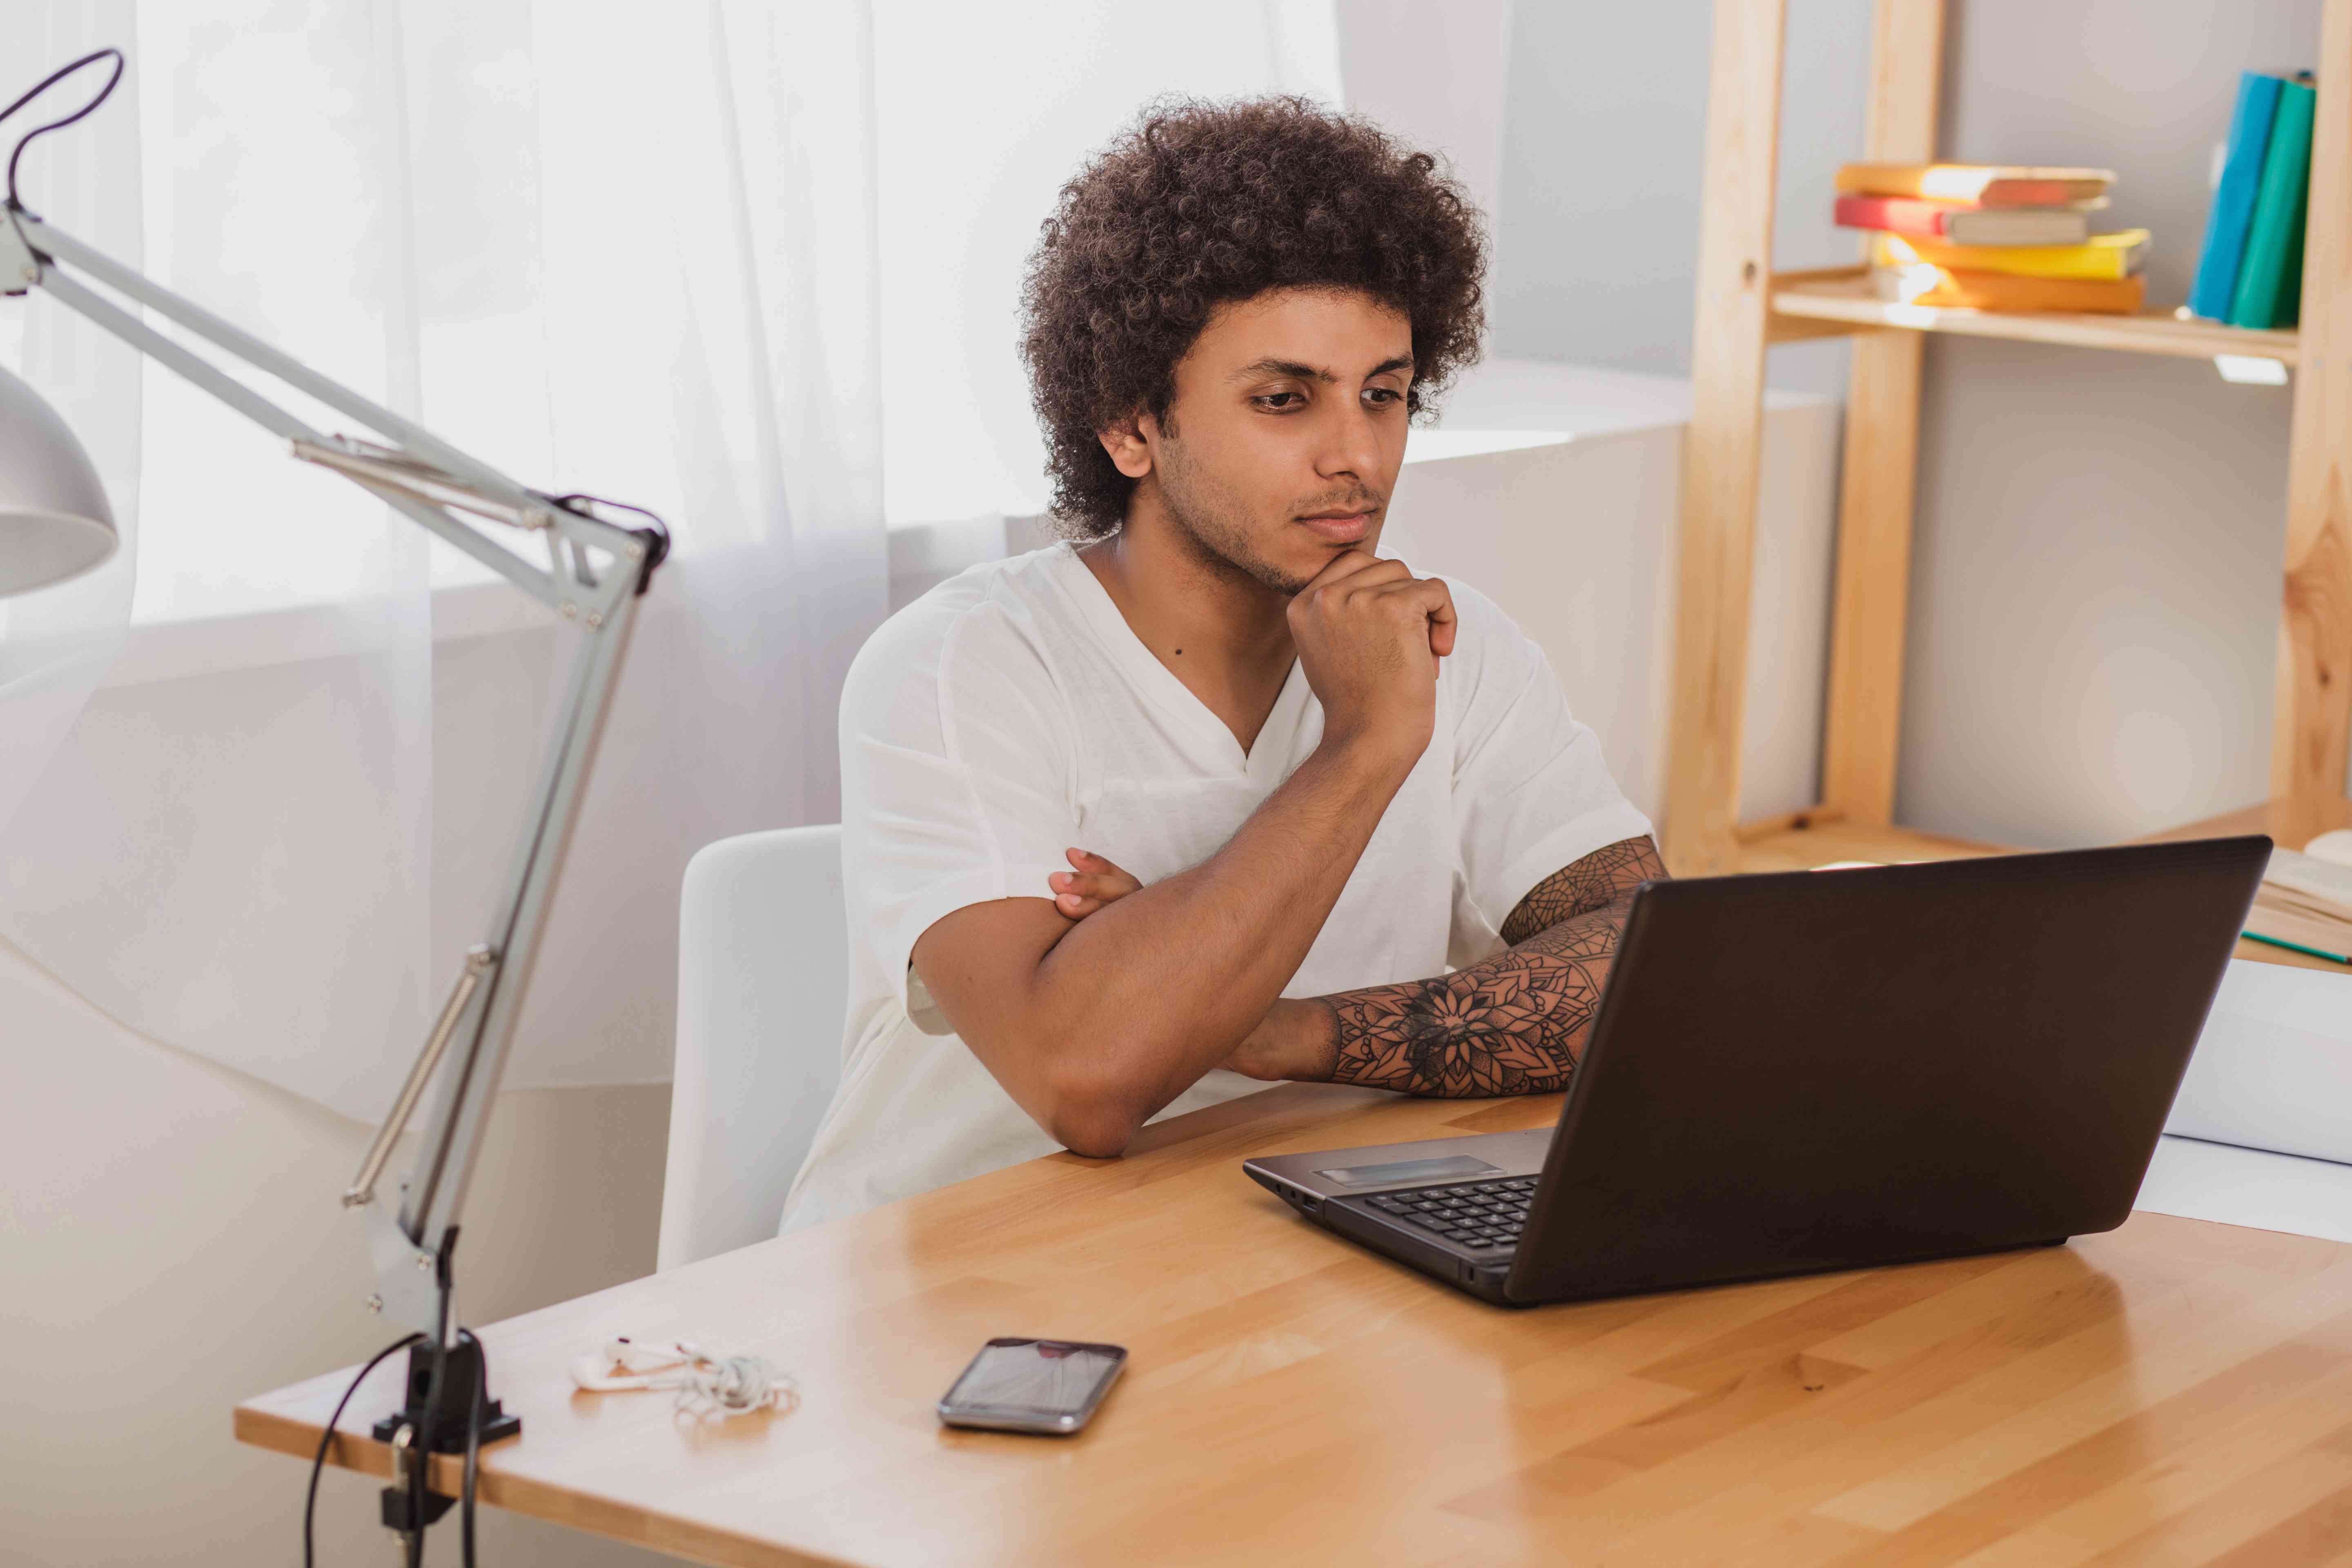 Young man sitting at a home desk and intently studying something on his laptop screen